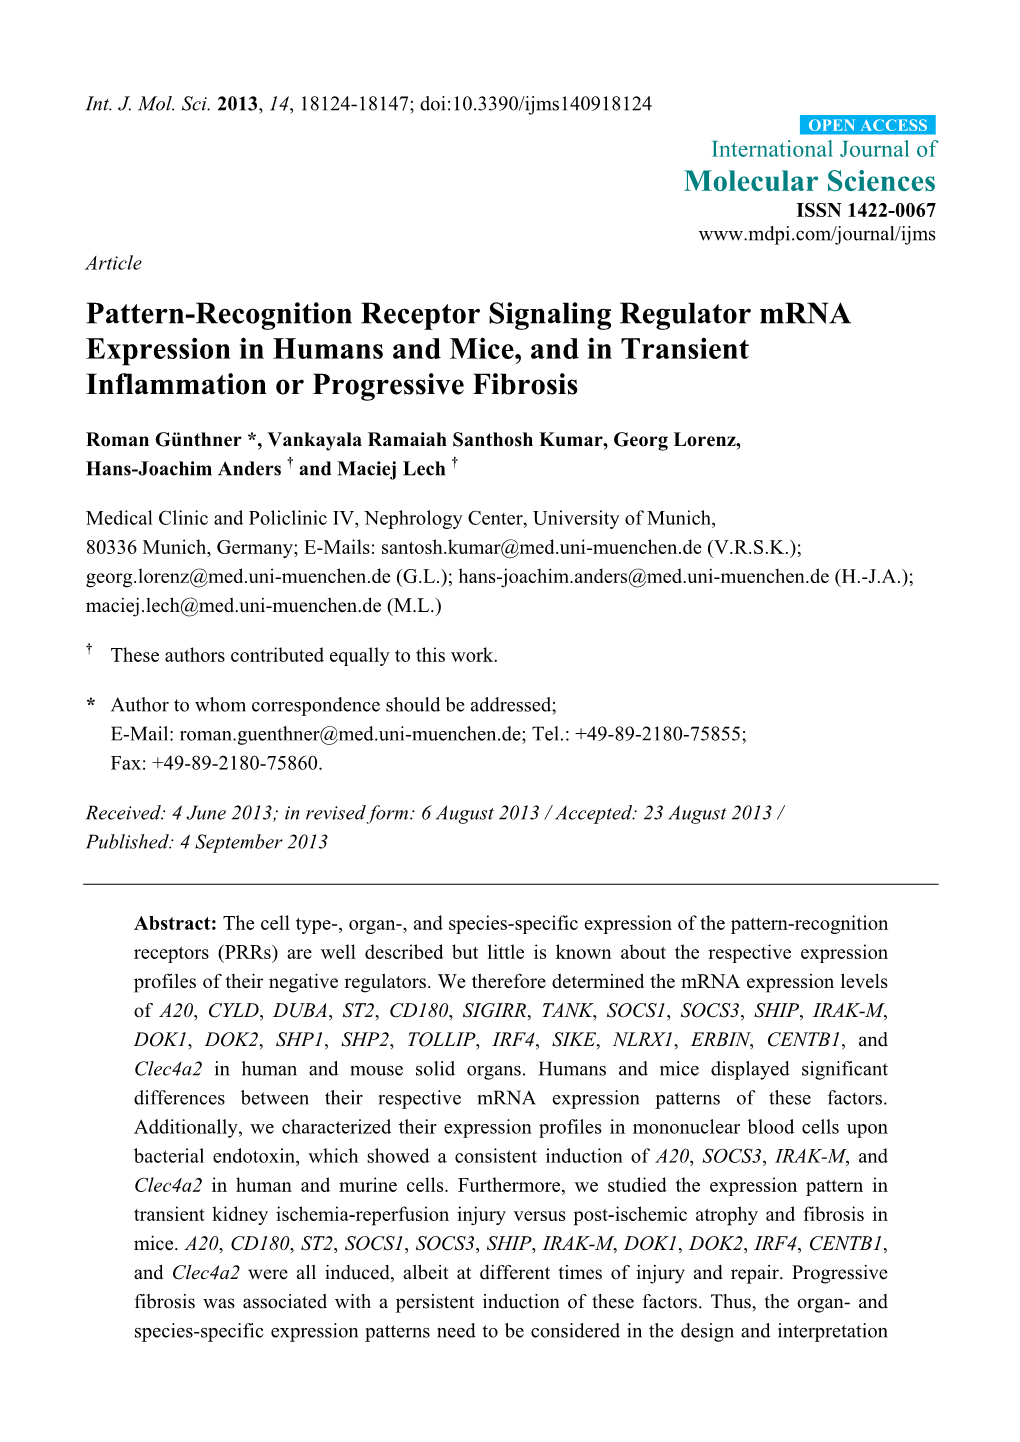 Pattern-Recognition Receptor Signaling Regulator Mrna Expression in Humans and Mice, and in Transient Inflammation Or Progressive Fibrosis